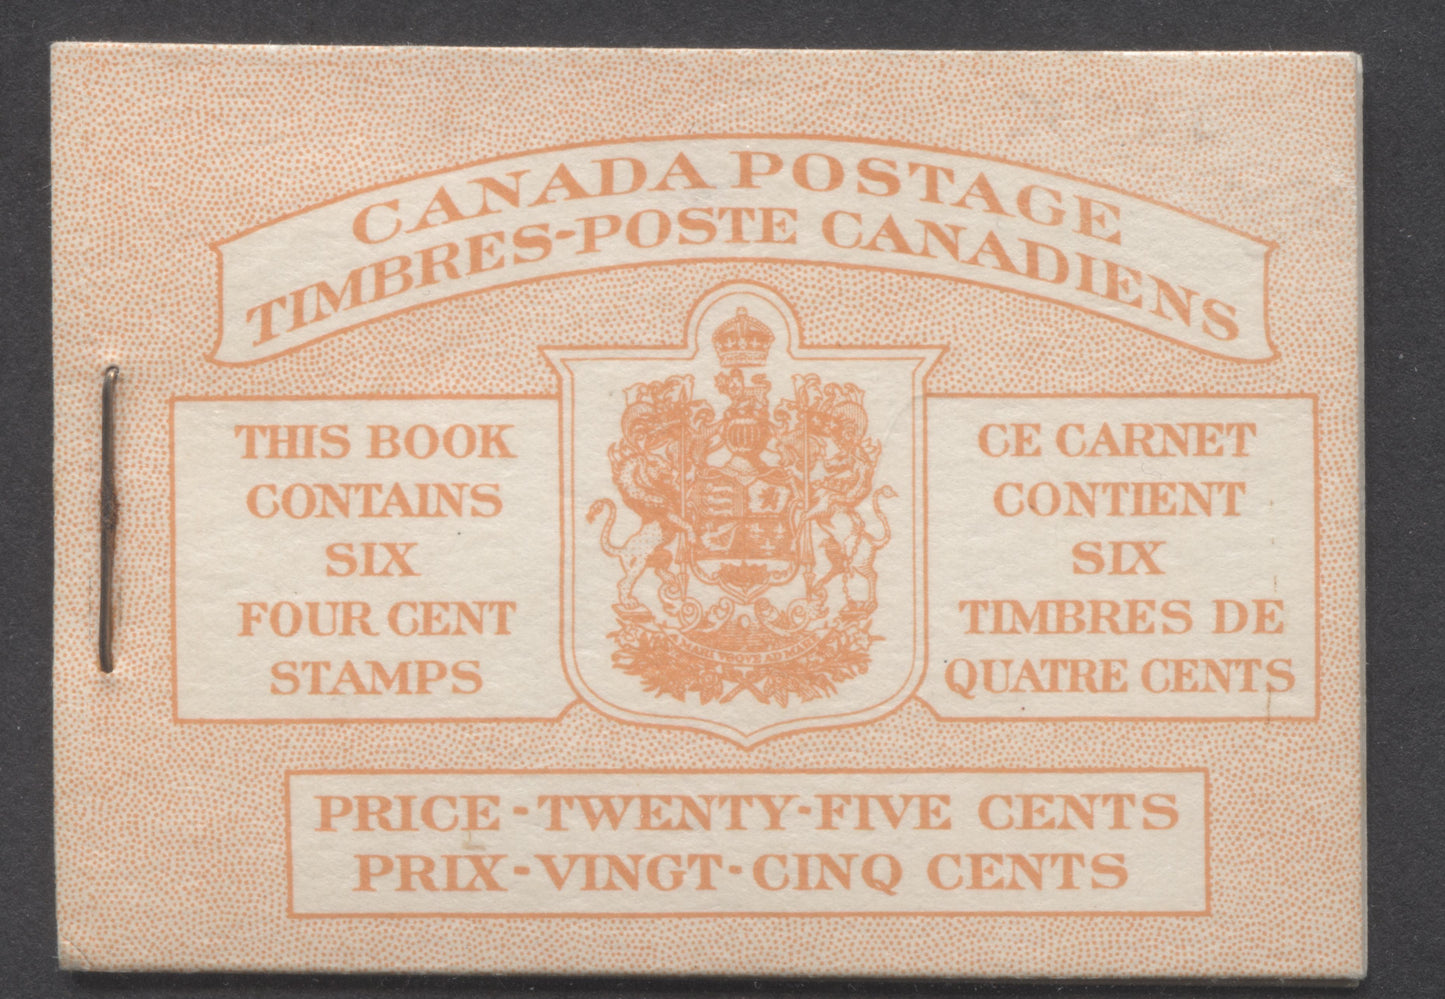 Lot 95 Canada #BK41bB 1949-1951 KGVI Issue, A Complete 25c Bilingual Booklet With 4c Dark Carmine, Pane Of 6. Front Cover IIIe, Back Cover Gii, Type II Cover, No Rate Page, 1,203,000 Issued